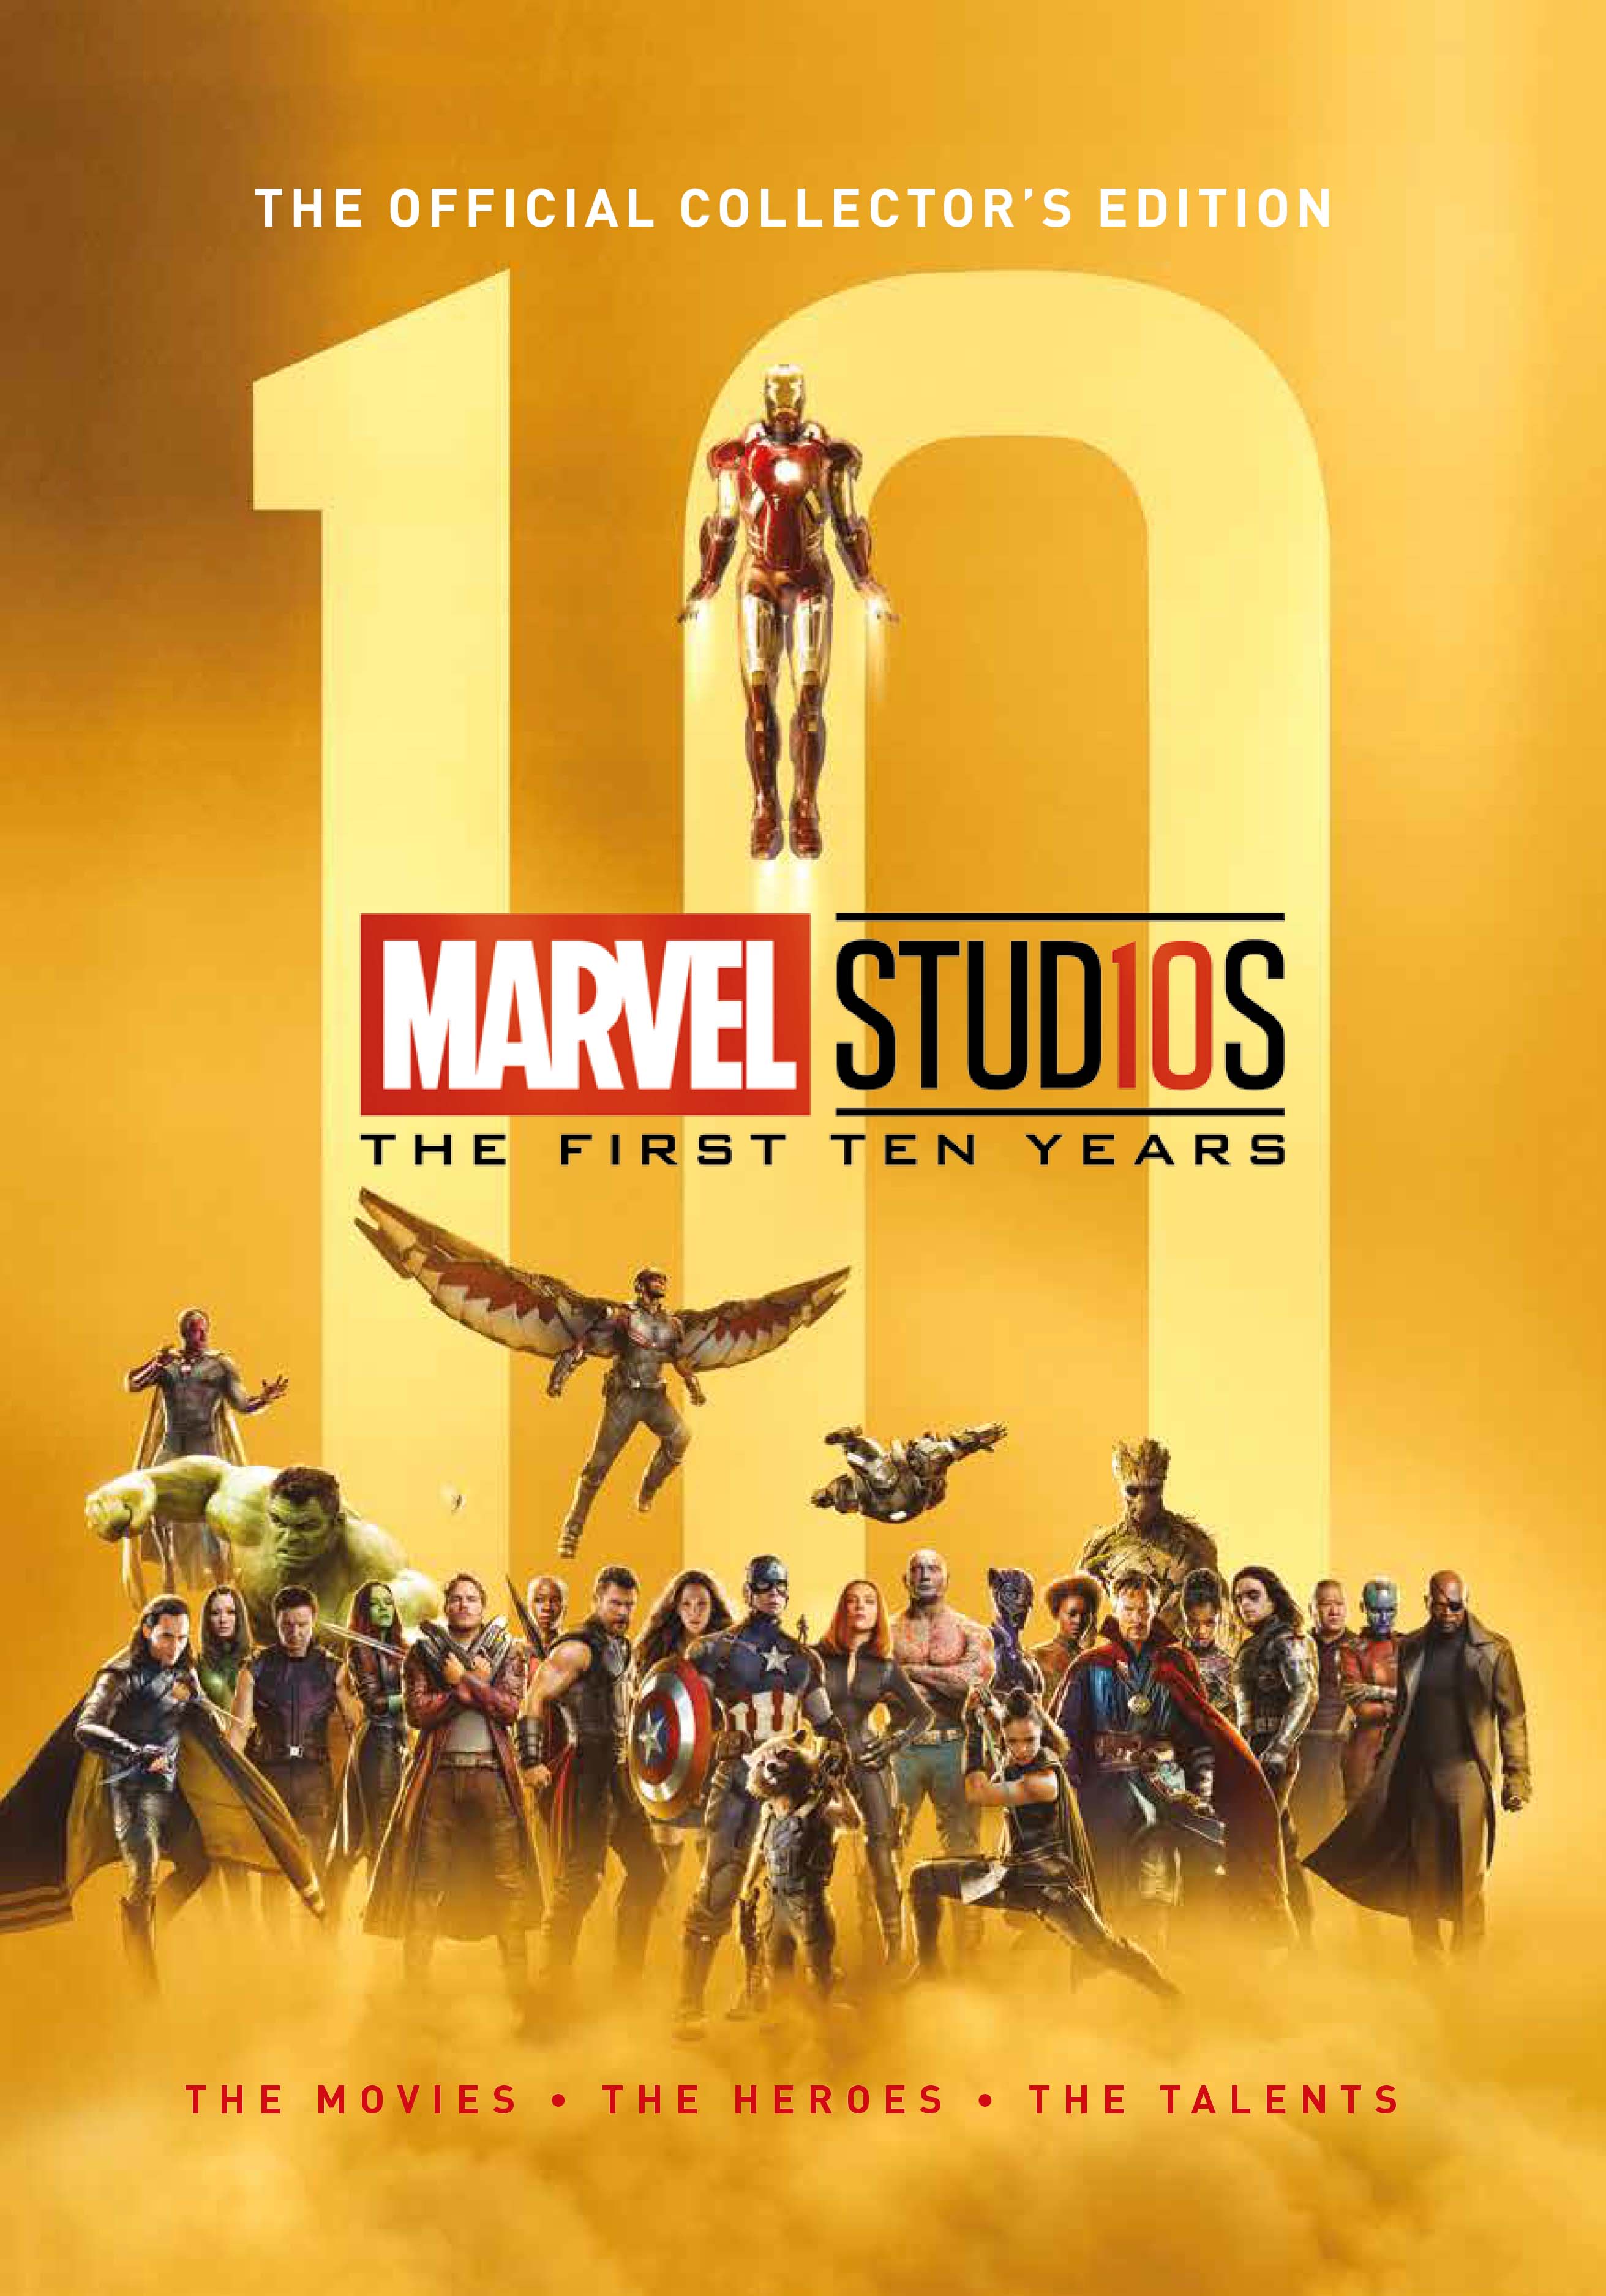 Marvel-Studios-The-First-10-Years-Banner-1-GamersRD